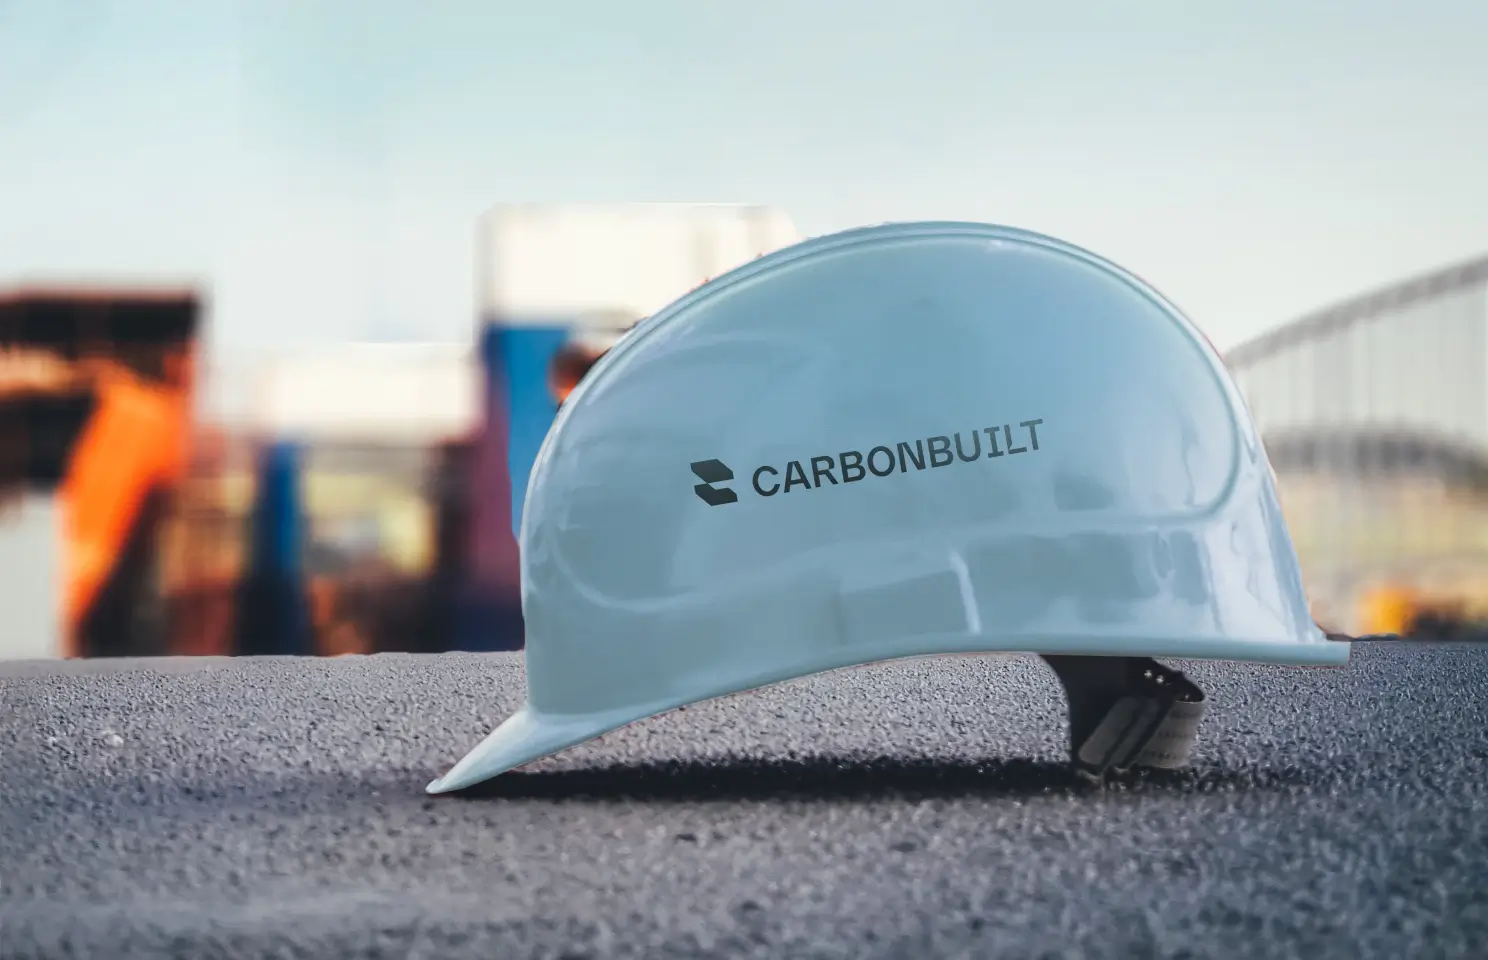 green jobs and careers in industrial decarbonization at CarbonBuilt